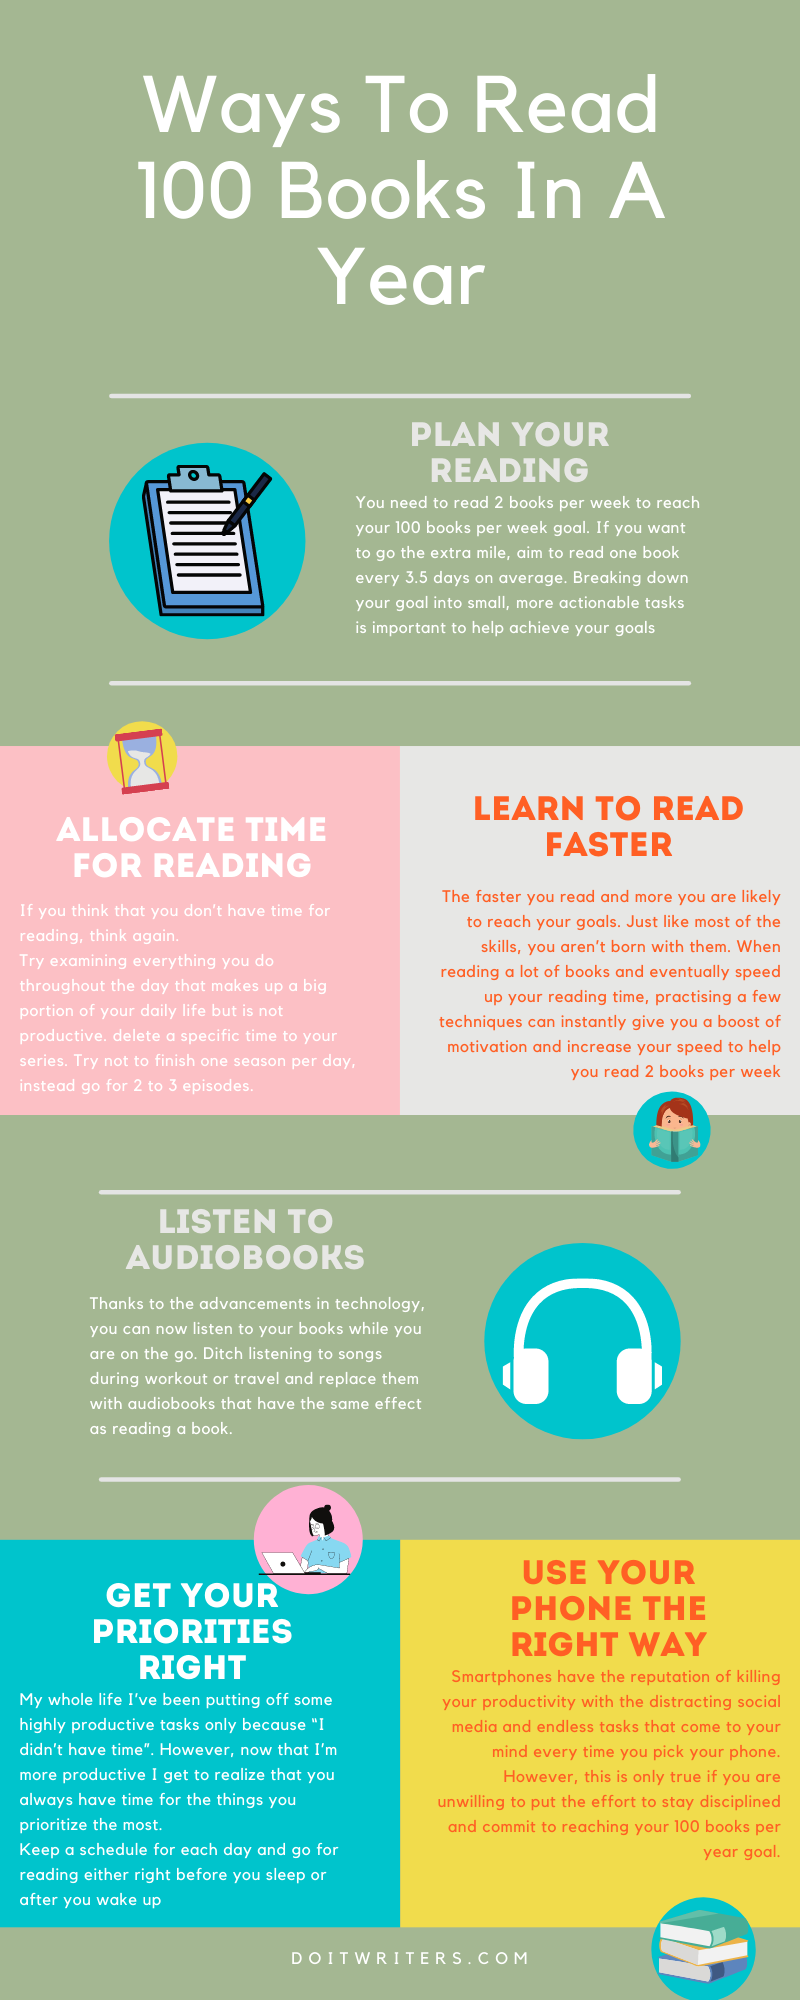 8 Ways to Read 100 Books in a Year